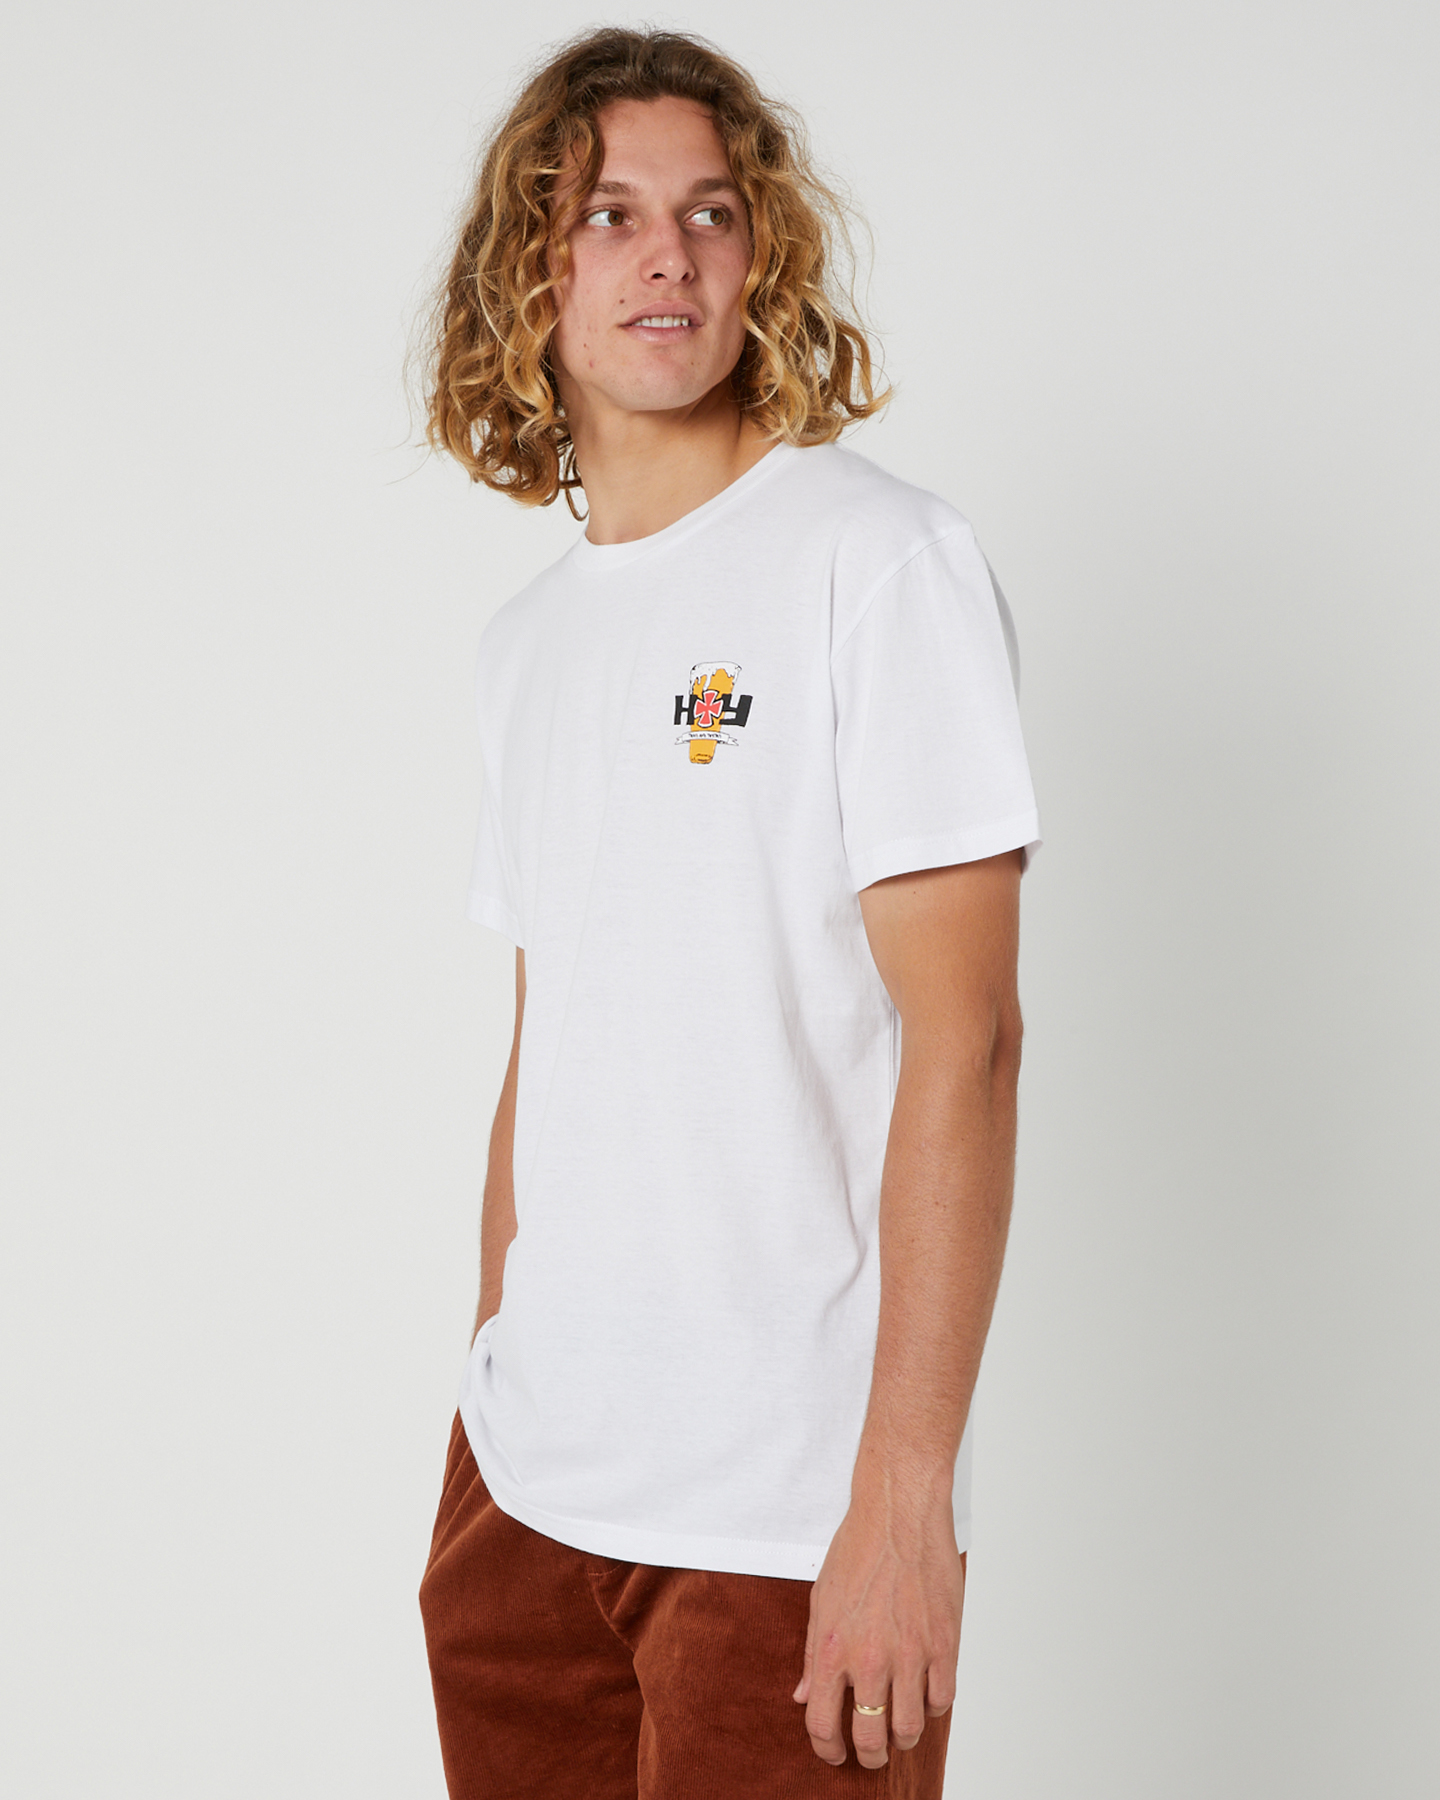 Liive Vision Pour Man Mens Ss Tee - White Multi | SurfStitch